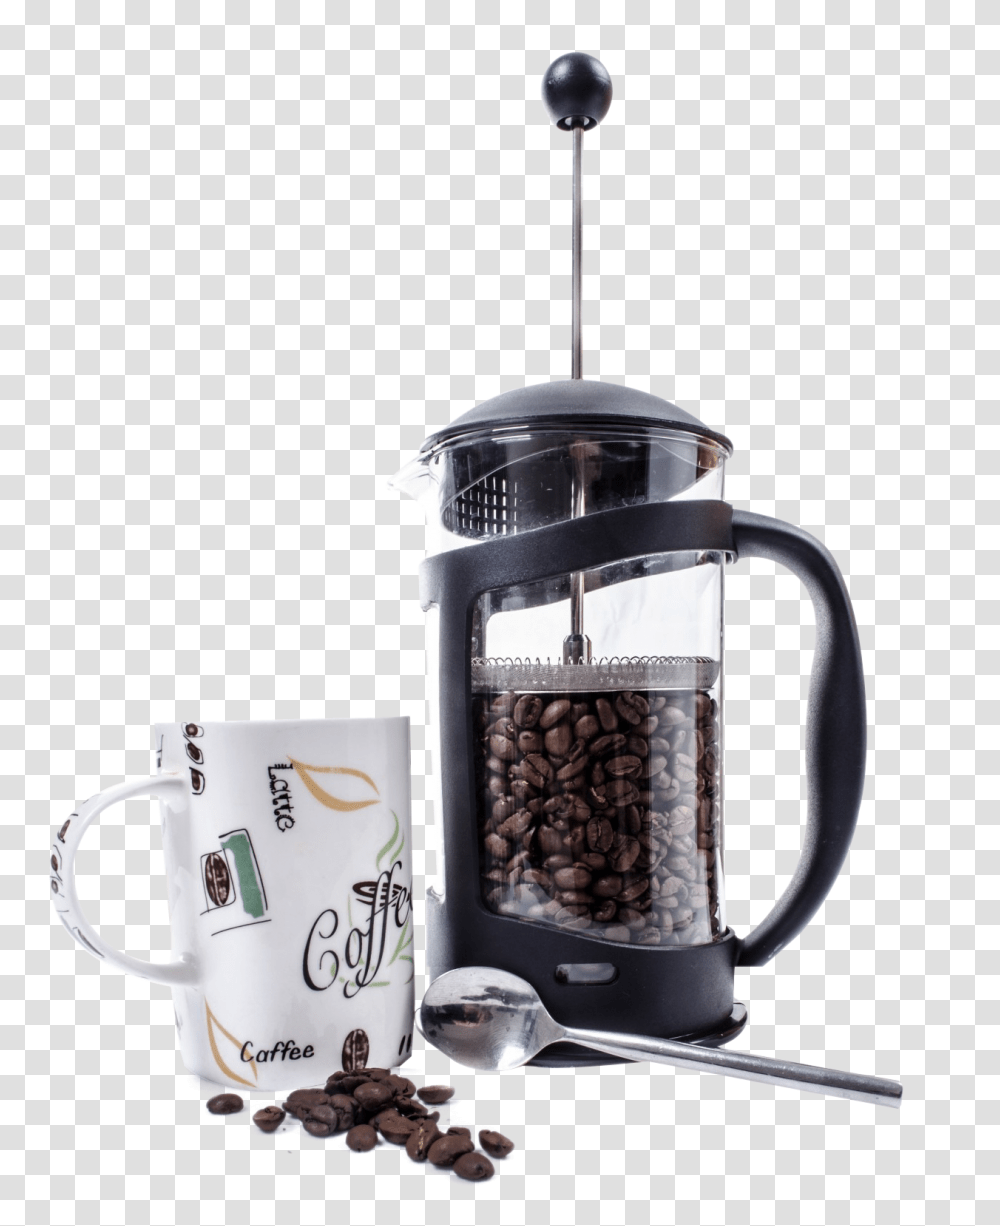 Coffee Grinder And Coffee Cup Image, Electronics, Mixer, Appliance, Soil Transparent Png